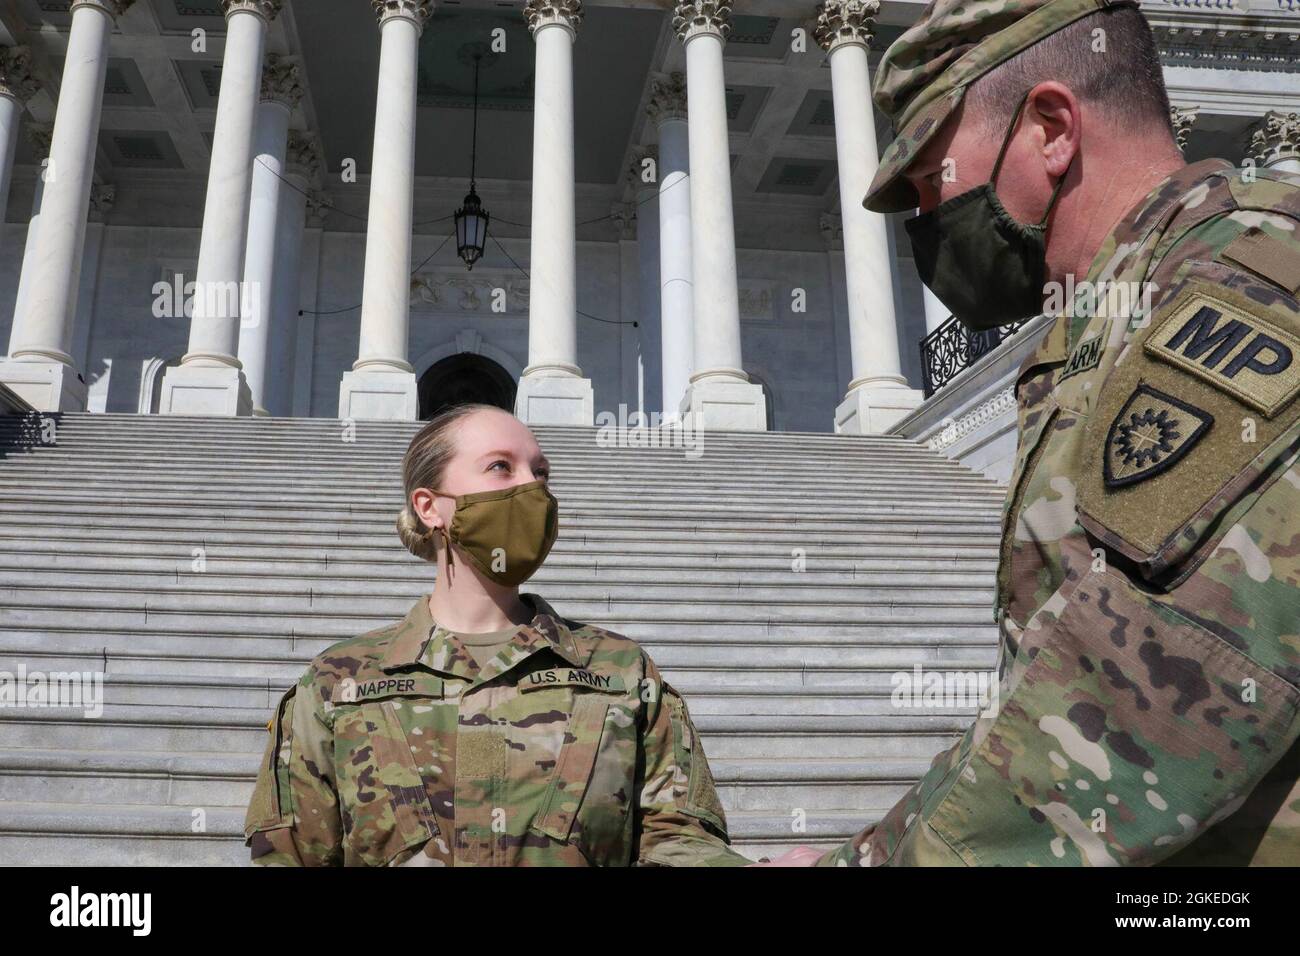 U.S. Army Maj. David Howe, right, of the Small Arms Readiness Training Section (SARTS), Garrison Training Center, Kentucky National Guard, presides over a promotion ceremony for Spc. Jordan Napper of Detachment 1, 2113th Transportation Company, Kentucky National Guard, near the U.S. Capitol in Washington, D.C., March 30, 2021. The National Guard has been requested to continue supporting federal law enforcement agencies with security, communications, medical evacuation, logistics, and safety support to state, district and federal agencies through mid-March. Stock Photo